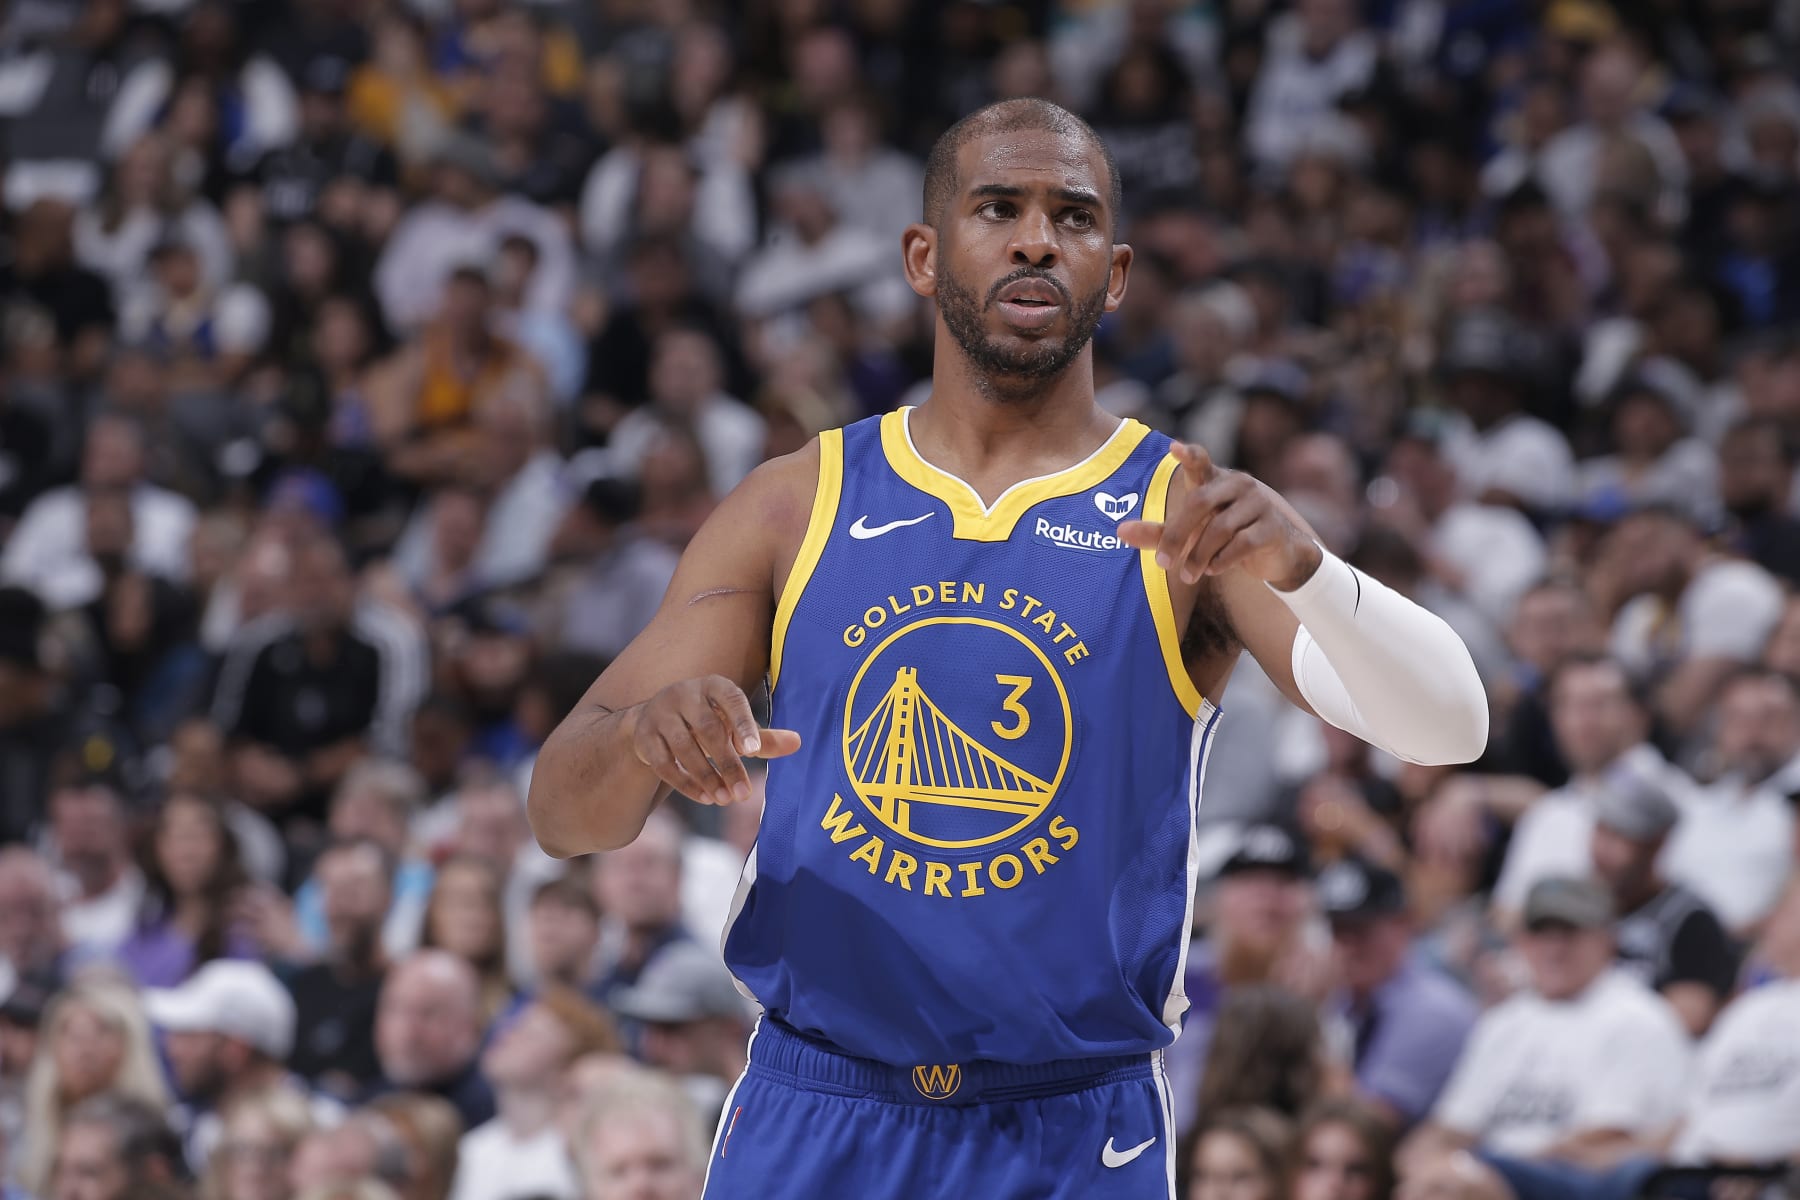 The Warriors may “possibly” forego their star in the wake of the NBA transfer rumor